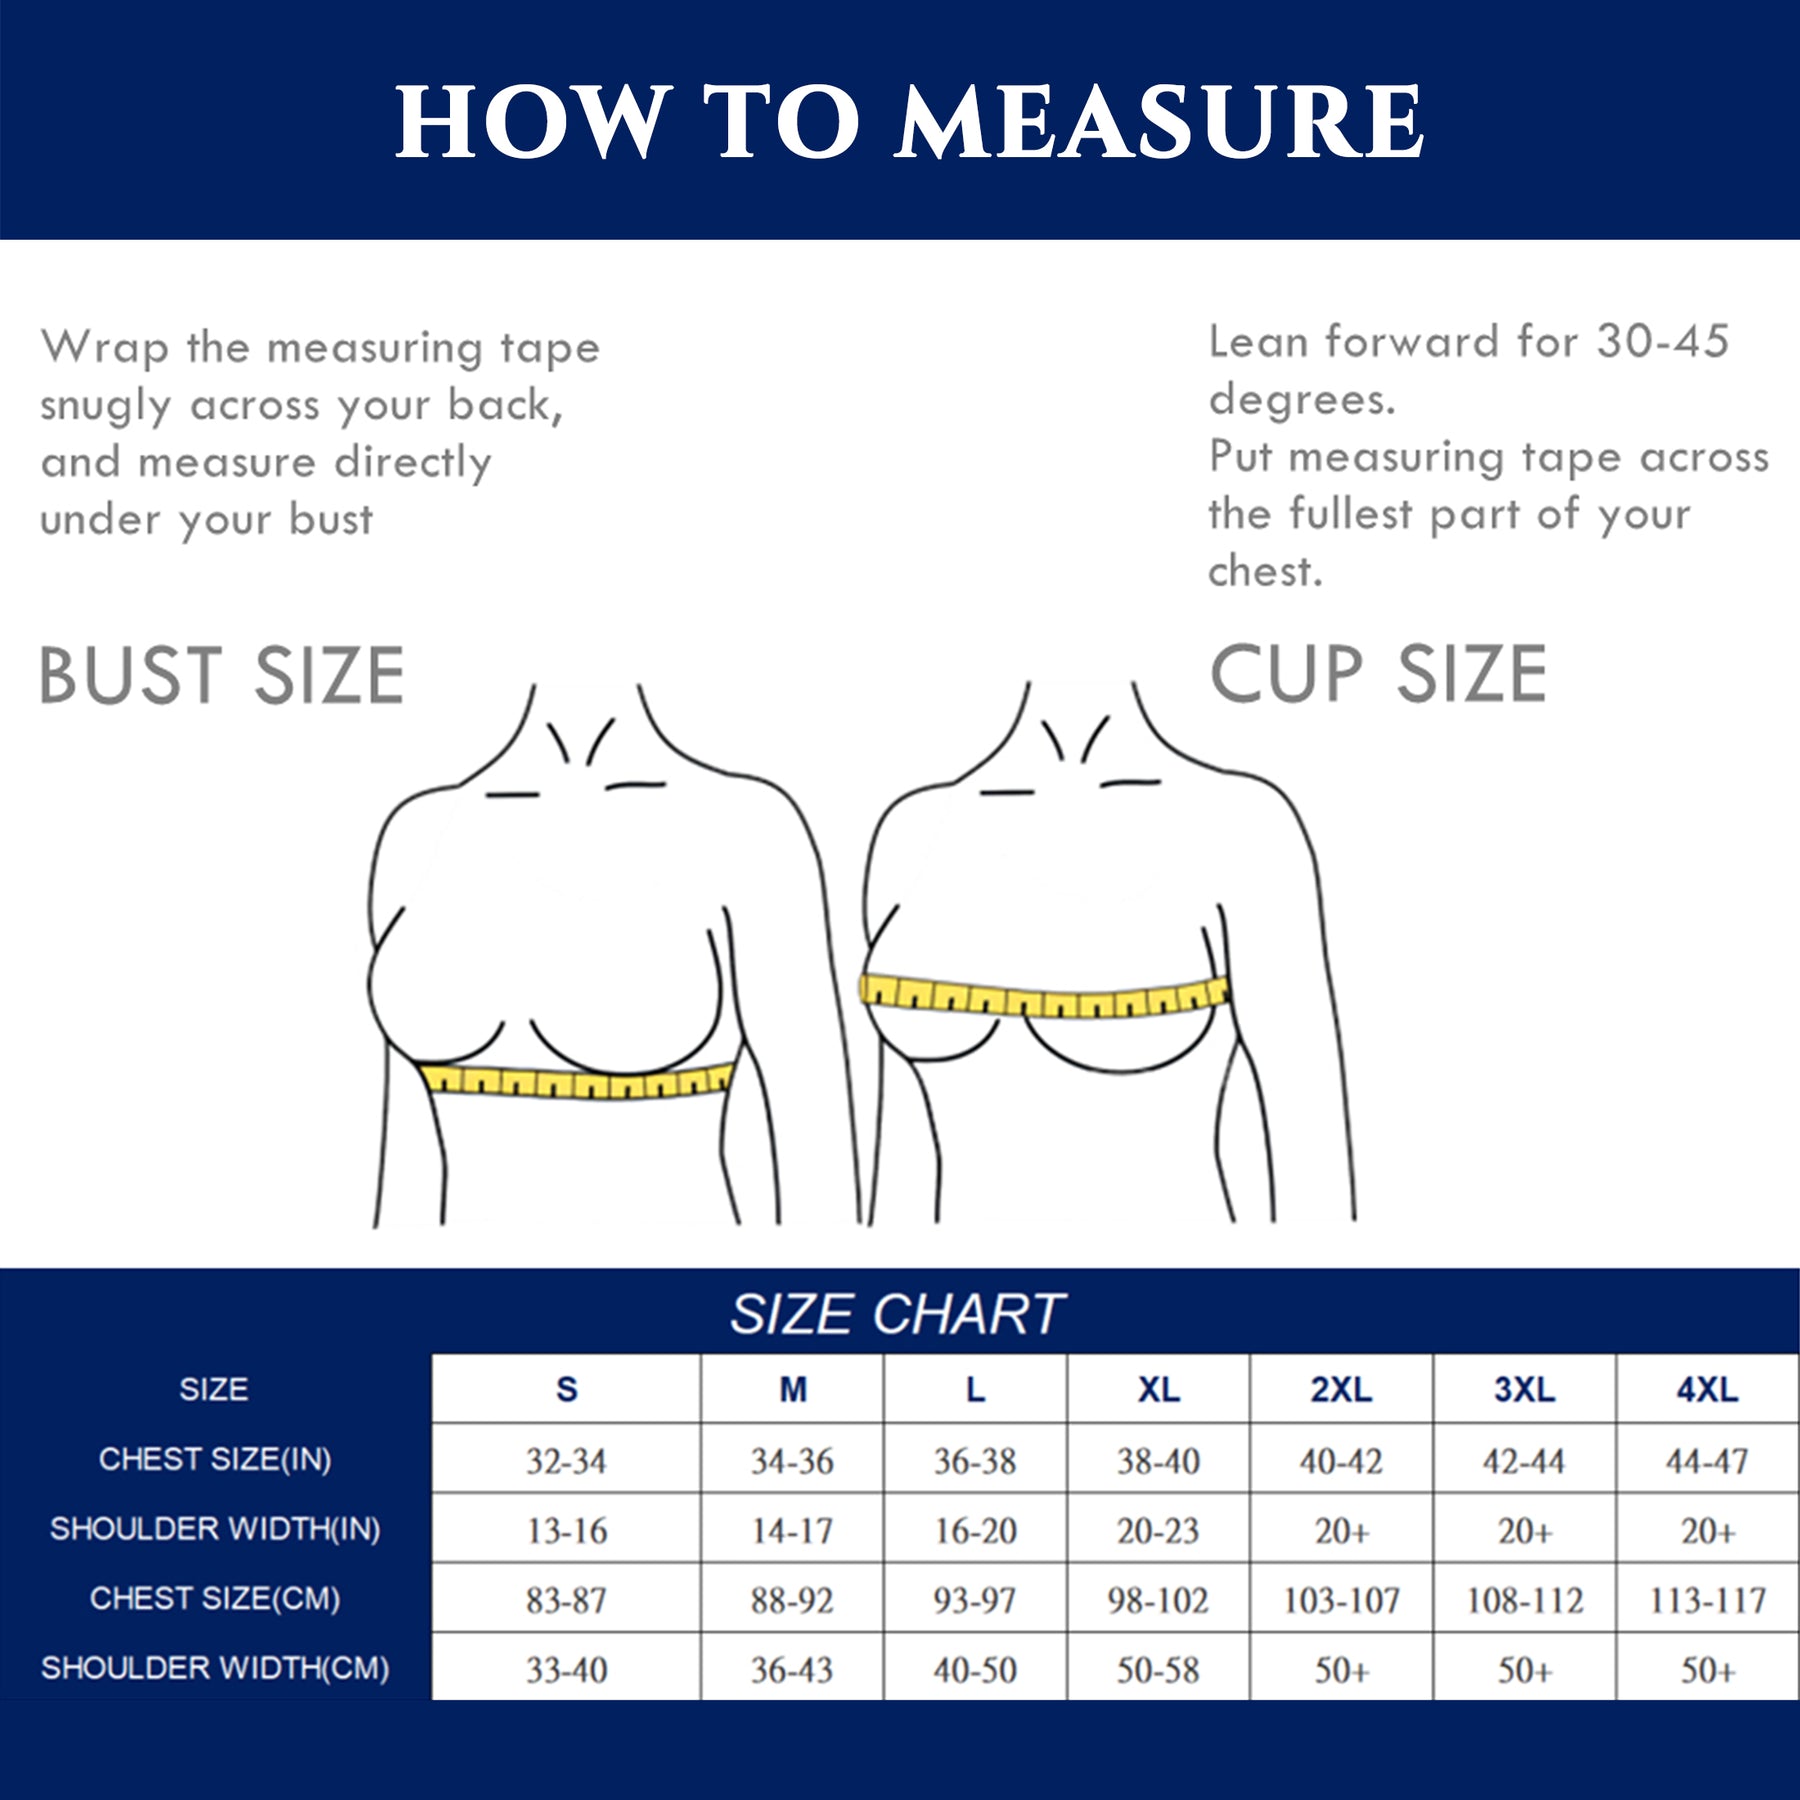 vin on X: Guide to bra size with correlating breast weight via  /r/coolguides   / X